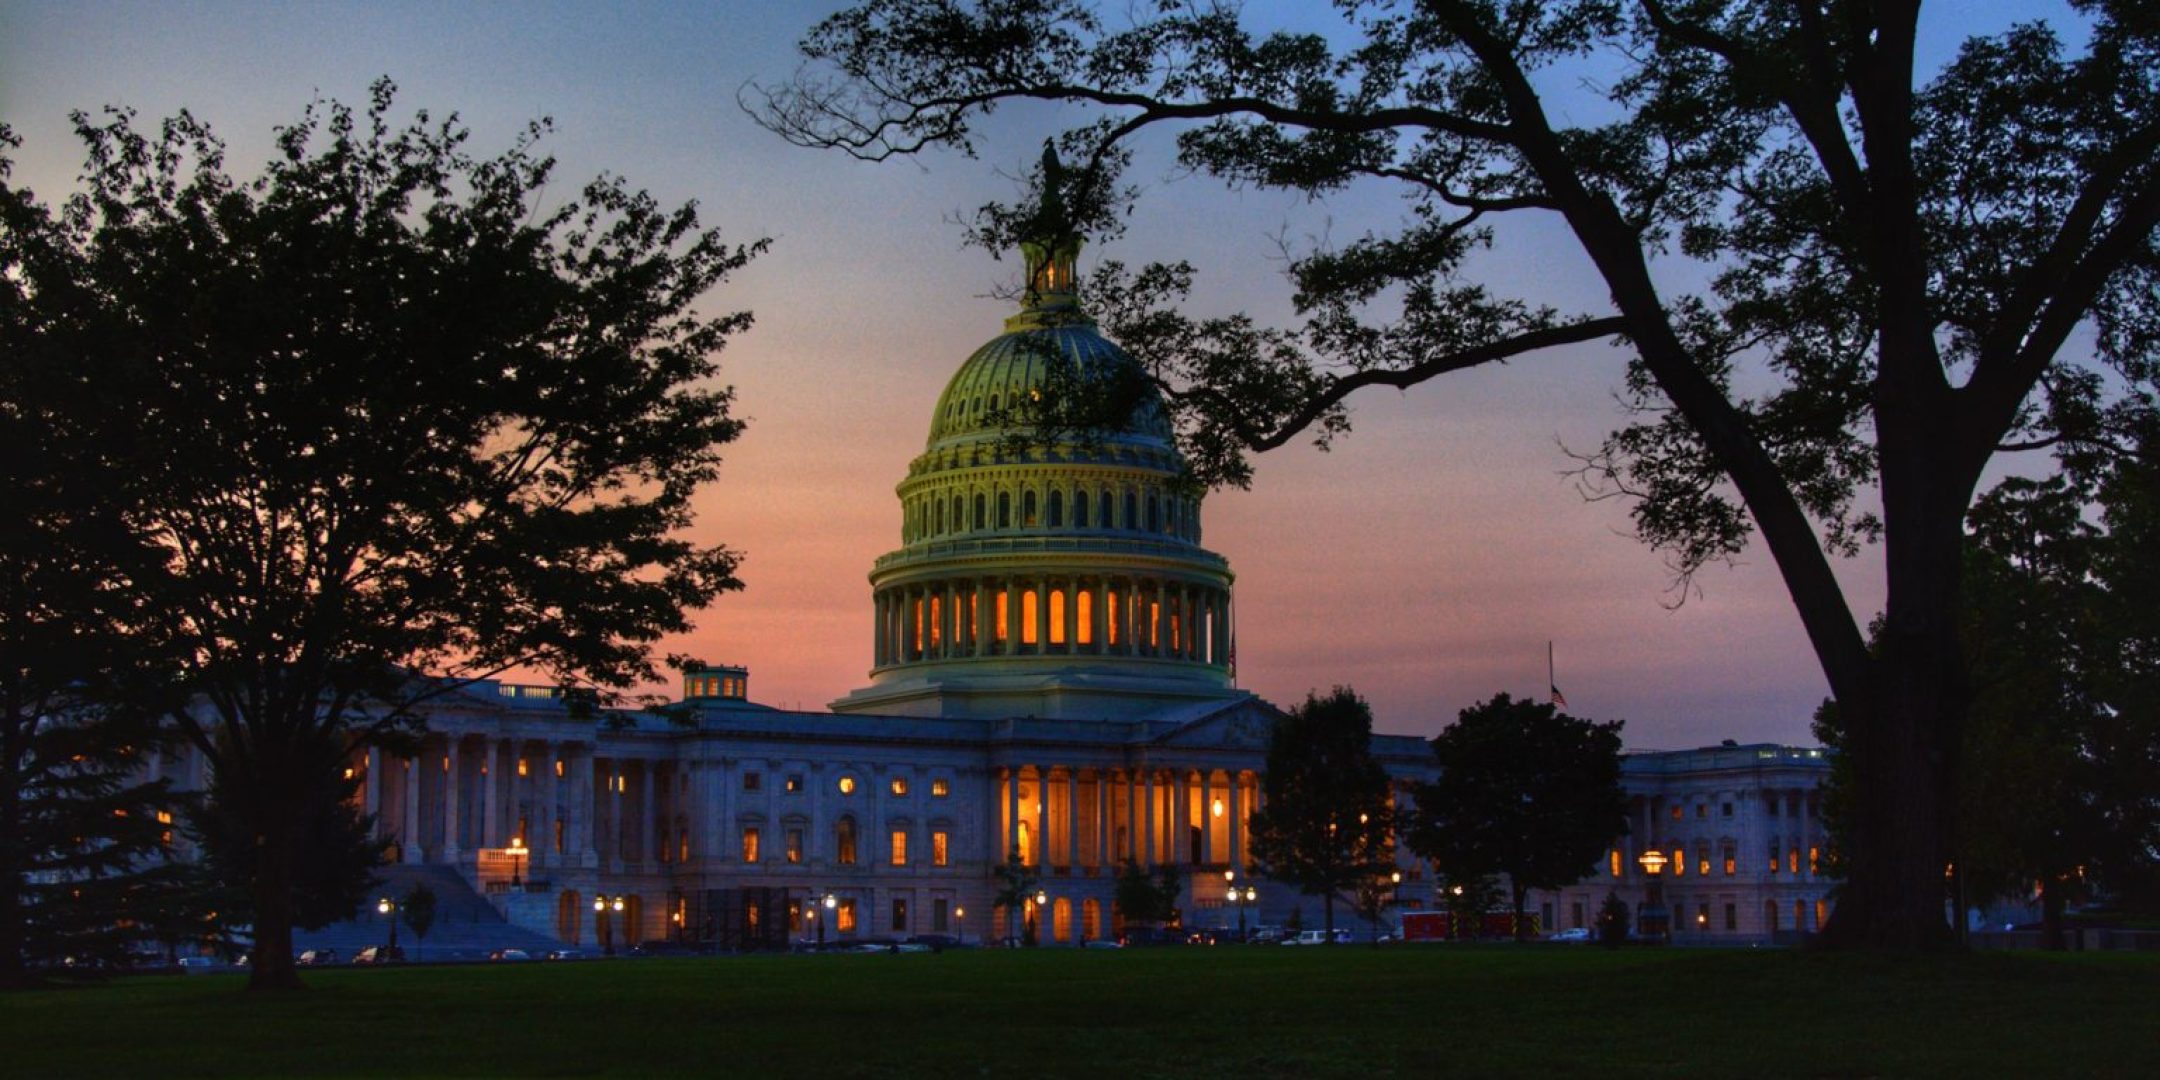 capitol-at-dusk-credit-mike-stoll-unsplash-1536x1024